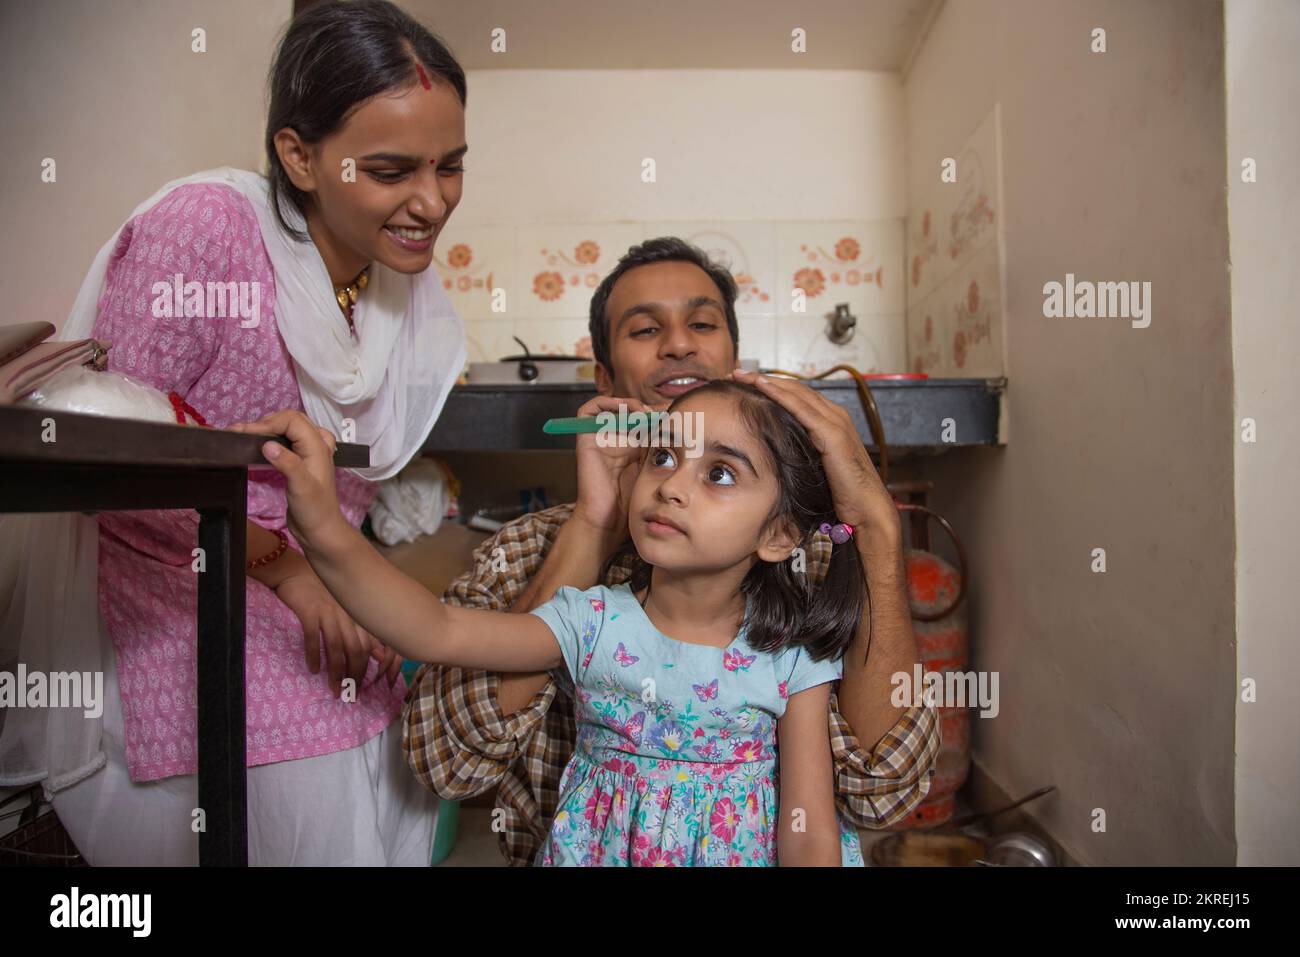 Father combing his daughter's hair in the kitchen while mother standing beside Stock Photo